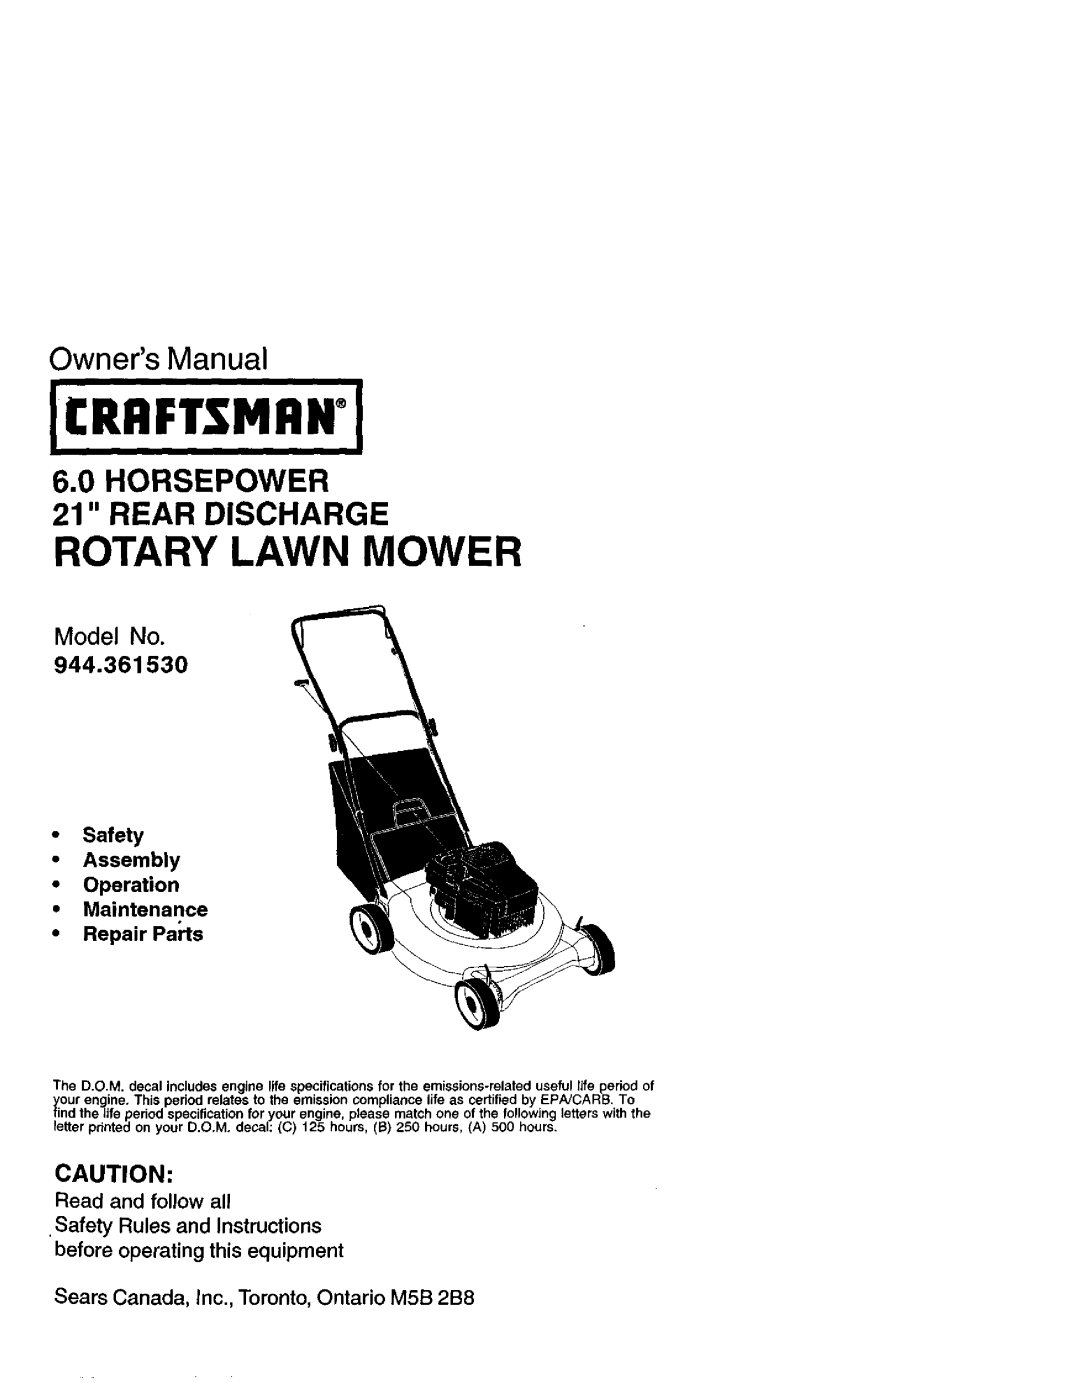 Craftsman 944.36153 owner manual HORSEPOWER 21 REAR DISCHARGE, Model No, Safety Assembly Operation Maintenance 